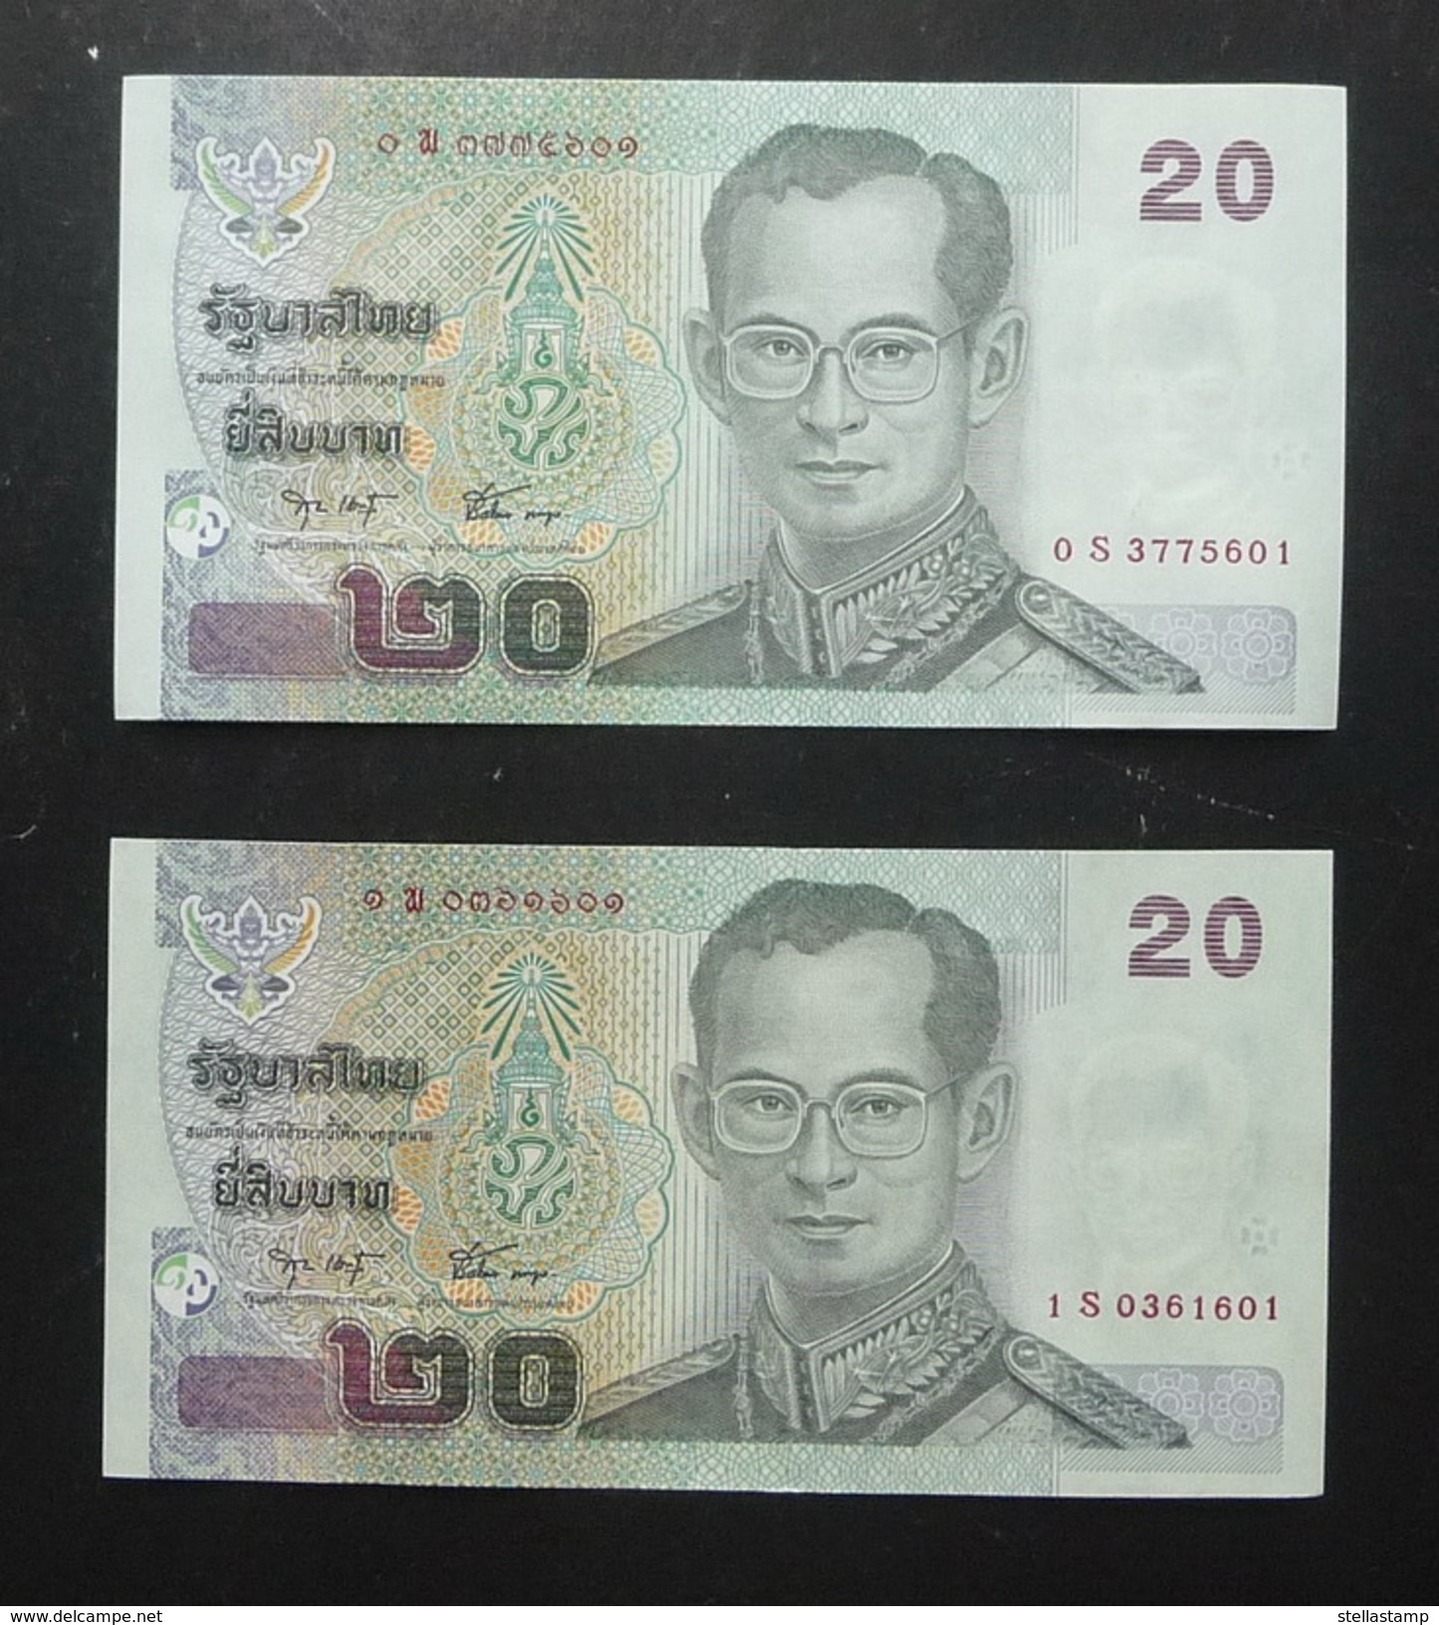 Thailand Banknote 20 Baht Series 15 P#109 SIGN#75 Replacement 0Sพ - 1Sพ UNC - Thailand